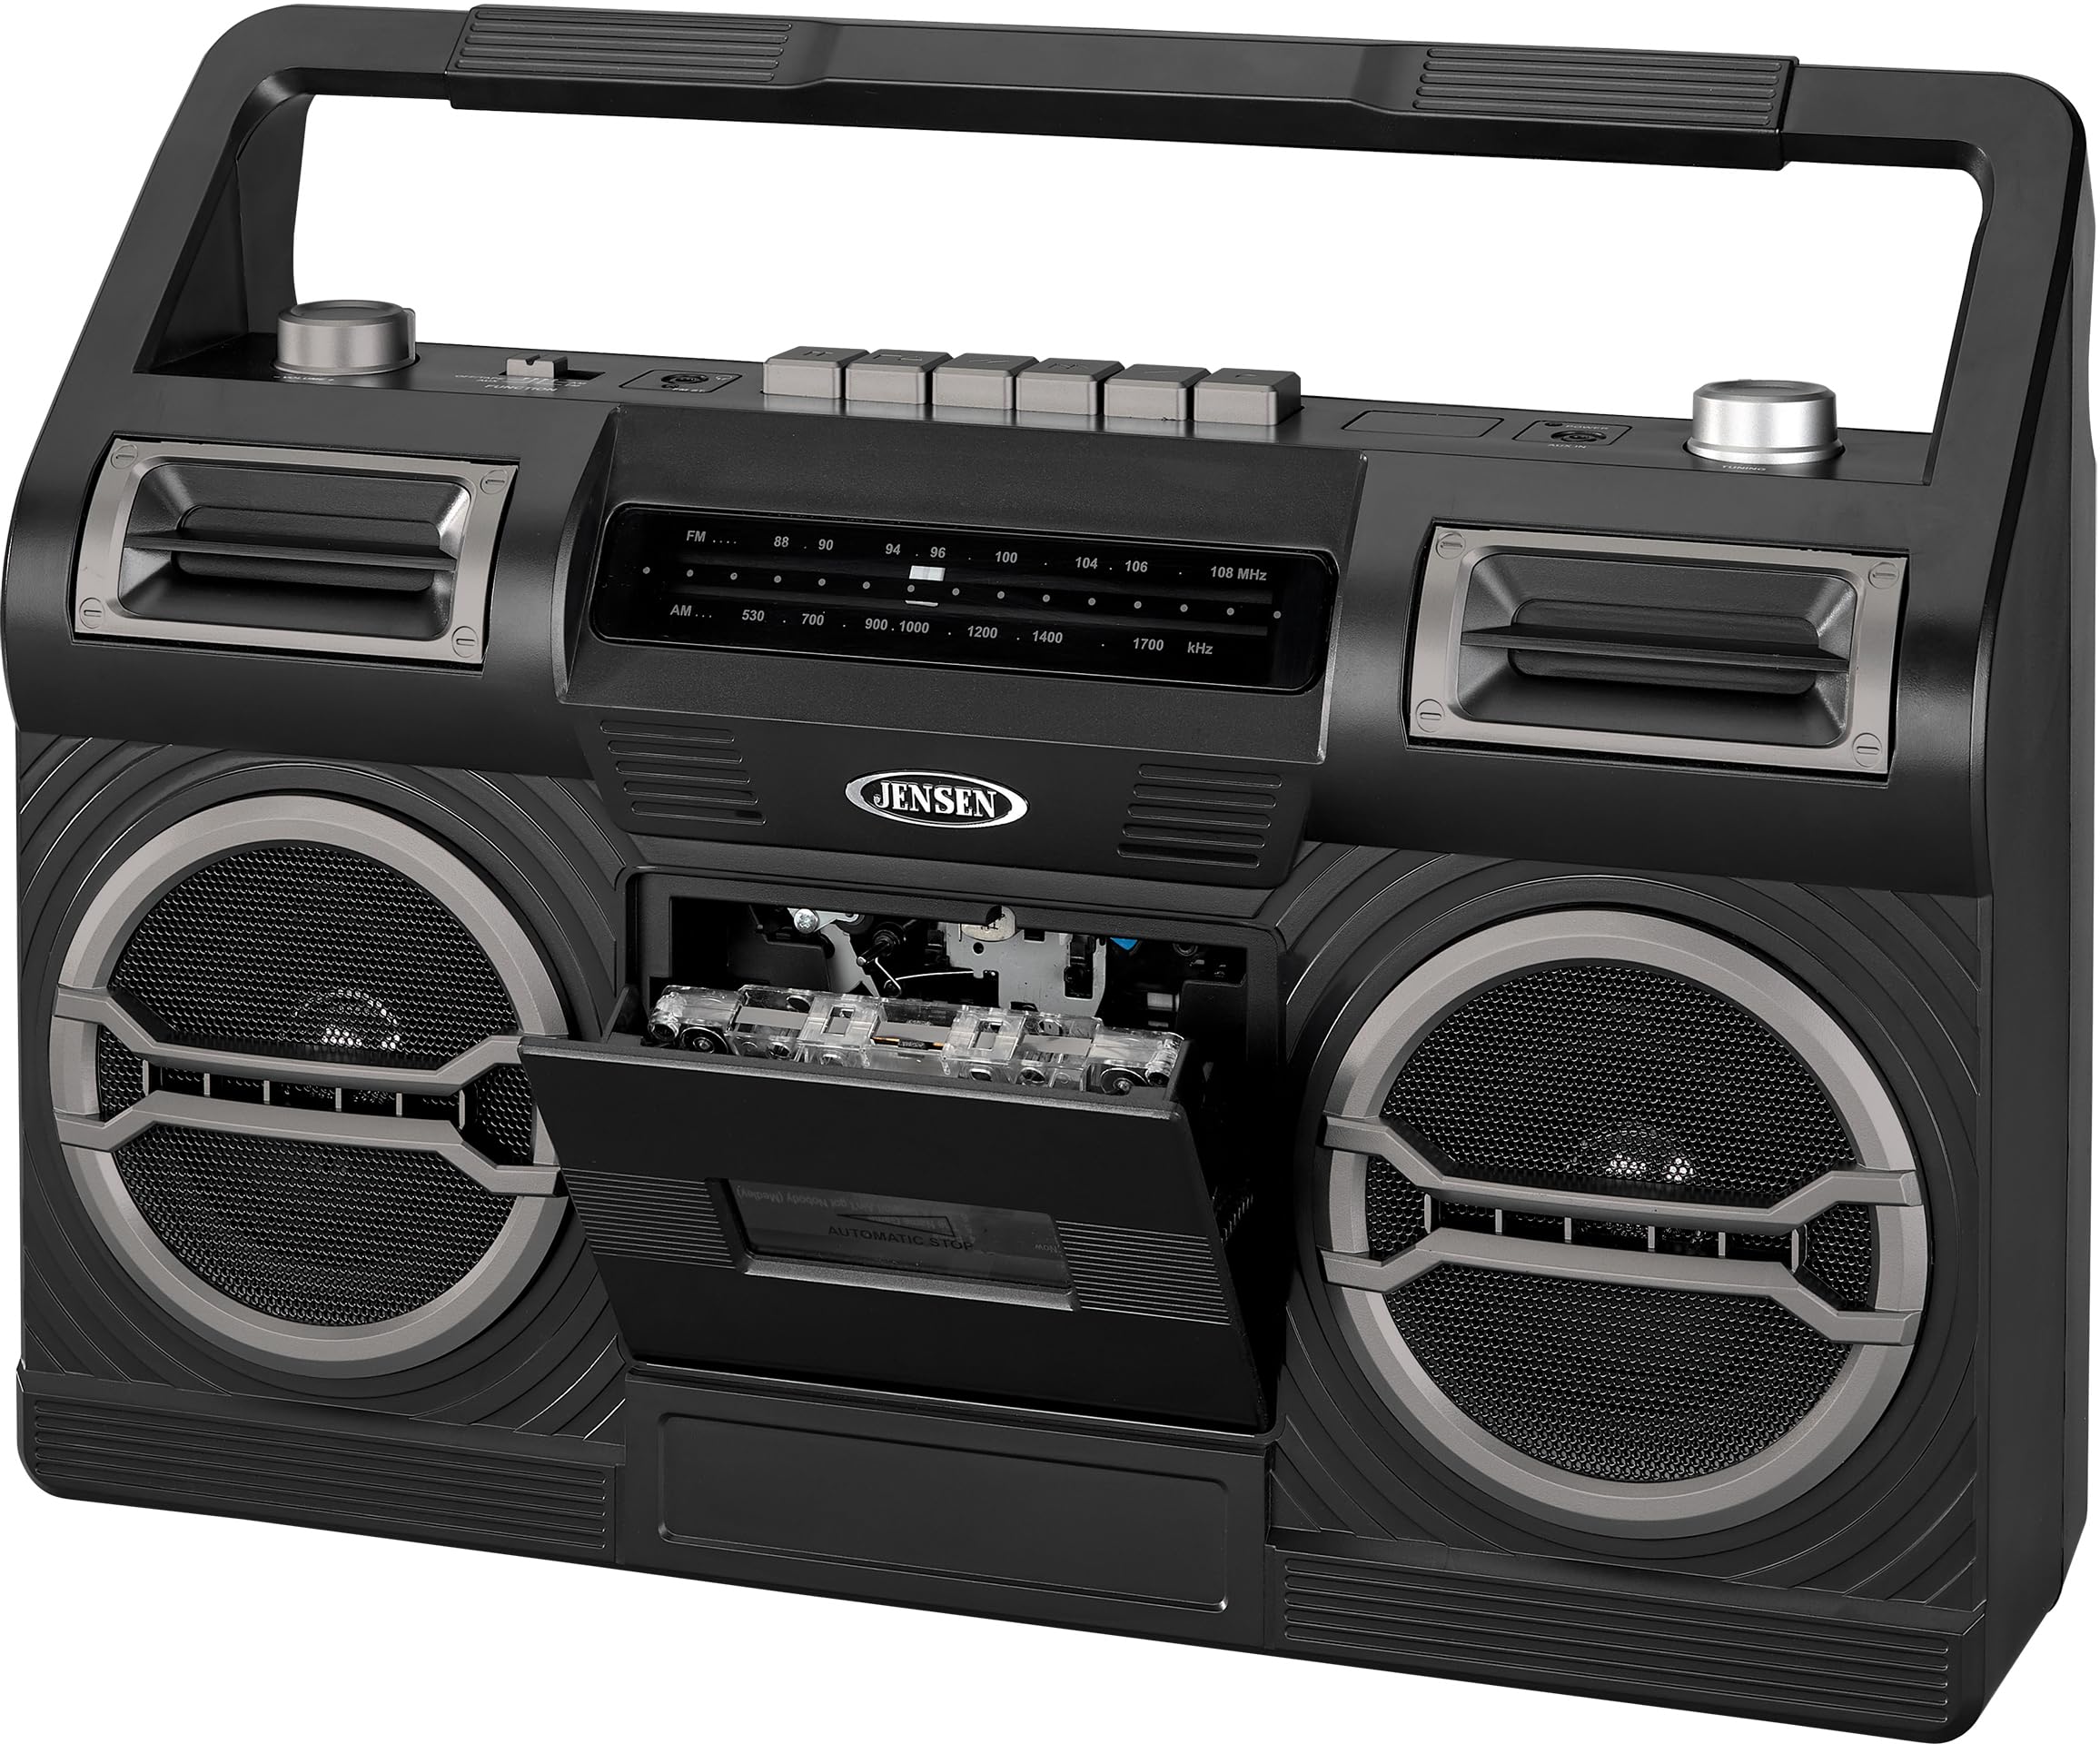 Jensen MCR-500 Portable AM/FM Radio with Cassette Player/Recorder and Built-in Speaker